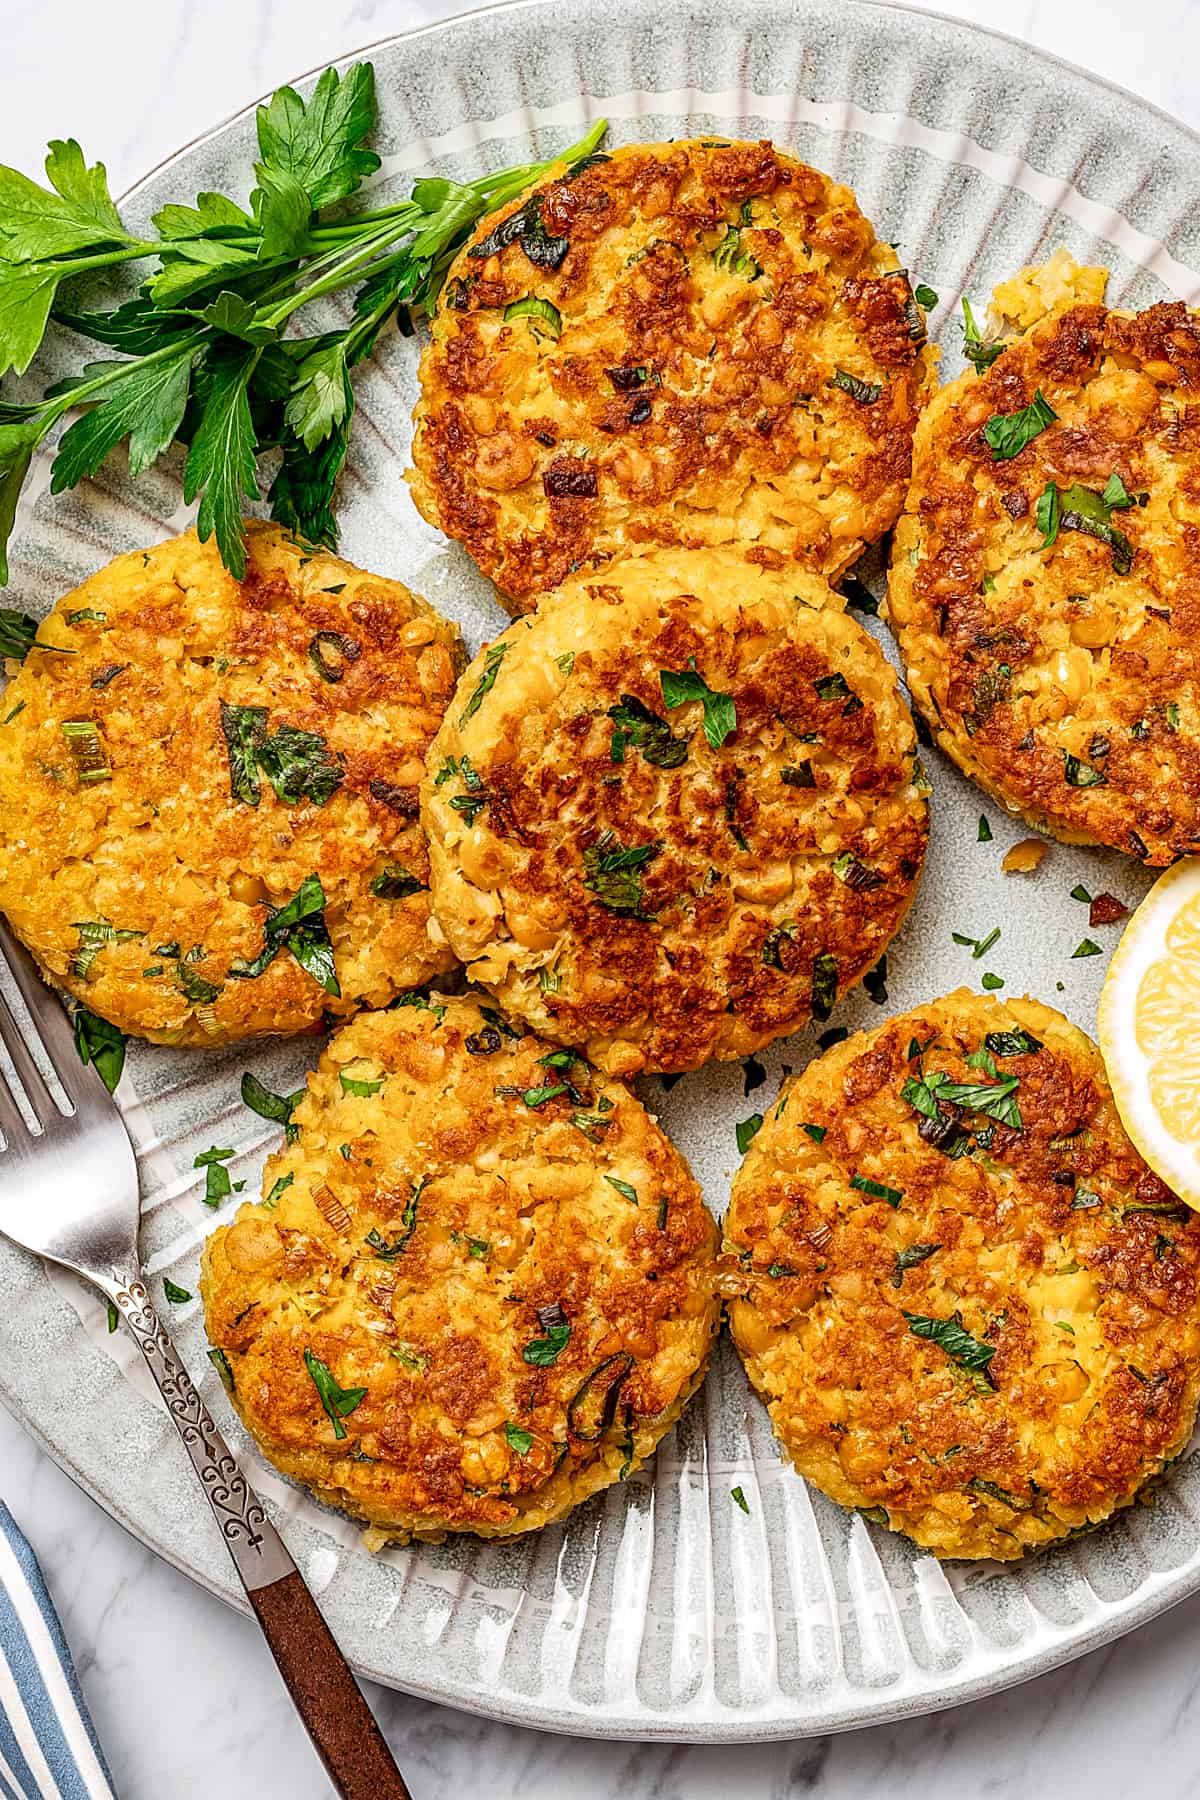 Six chickpea patties on a serving platter, garnished with parsley and lemon.